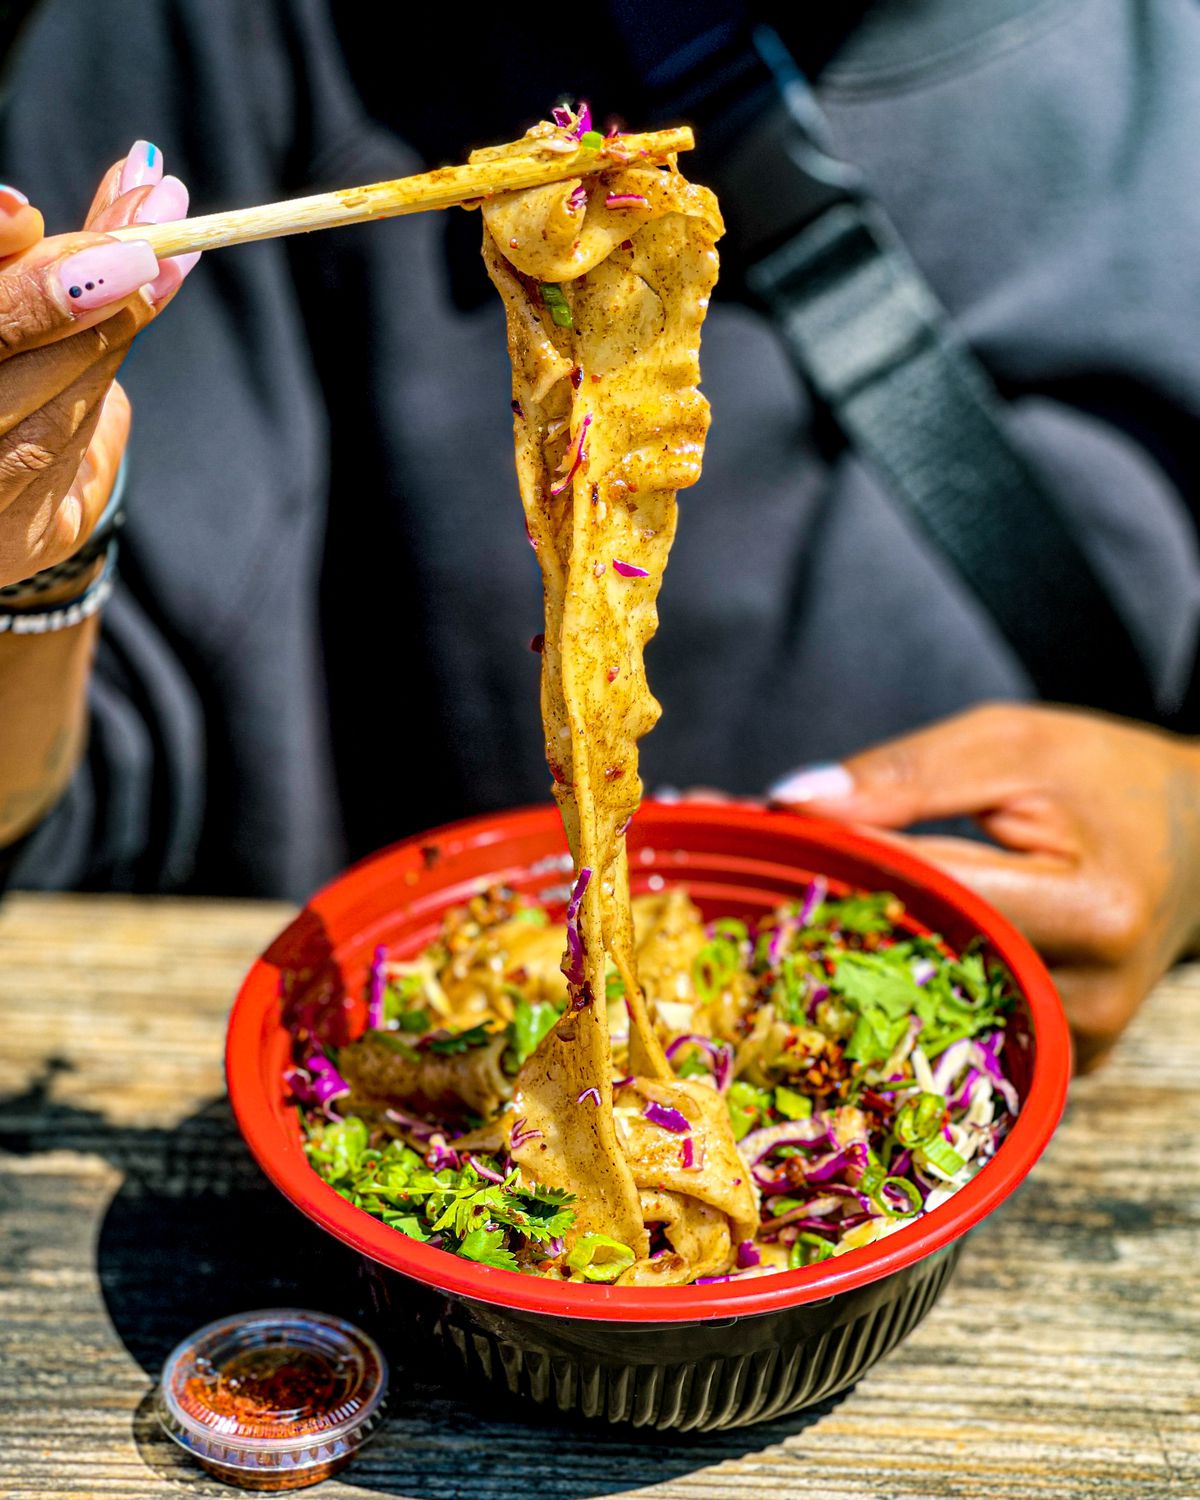 A hand with pink nails pulls thick noodles using chopsticks from a dark red bowl.